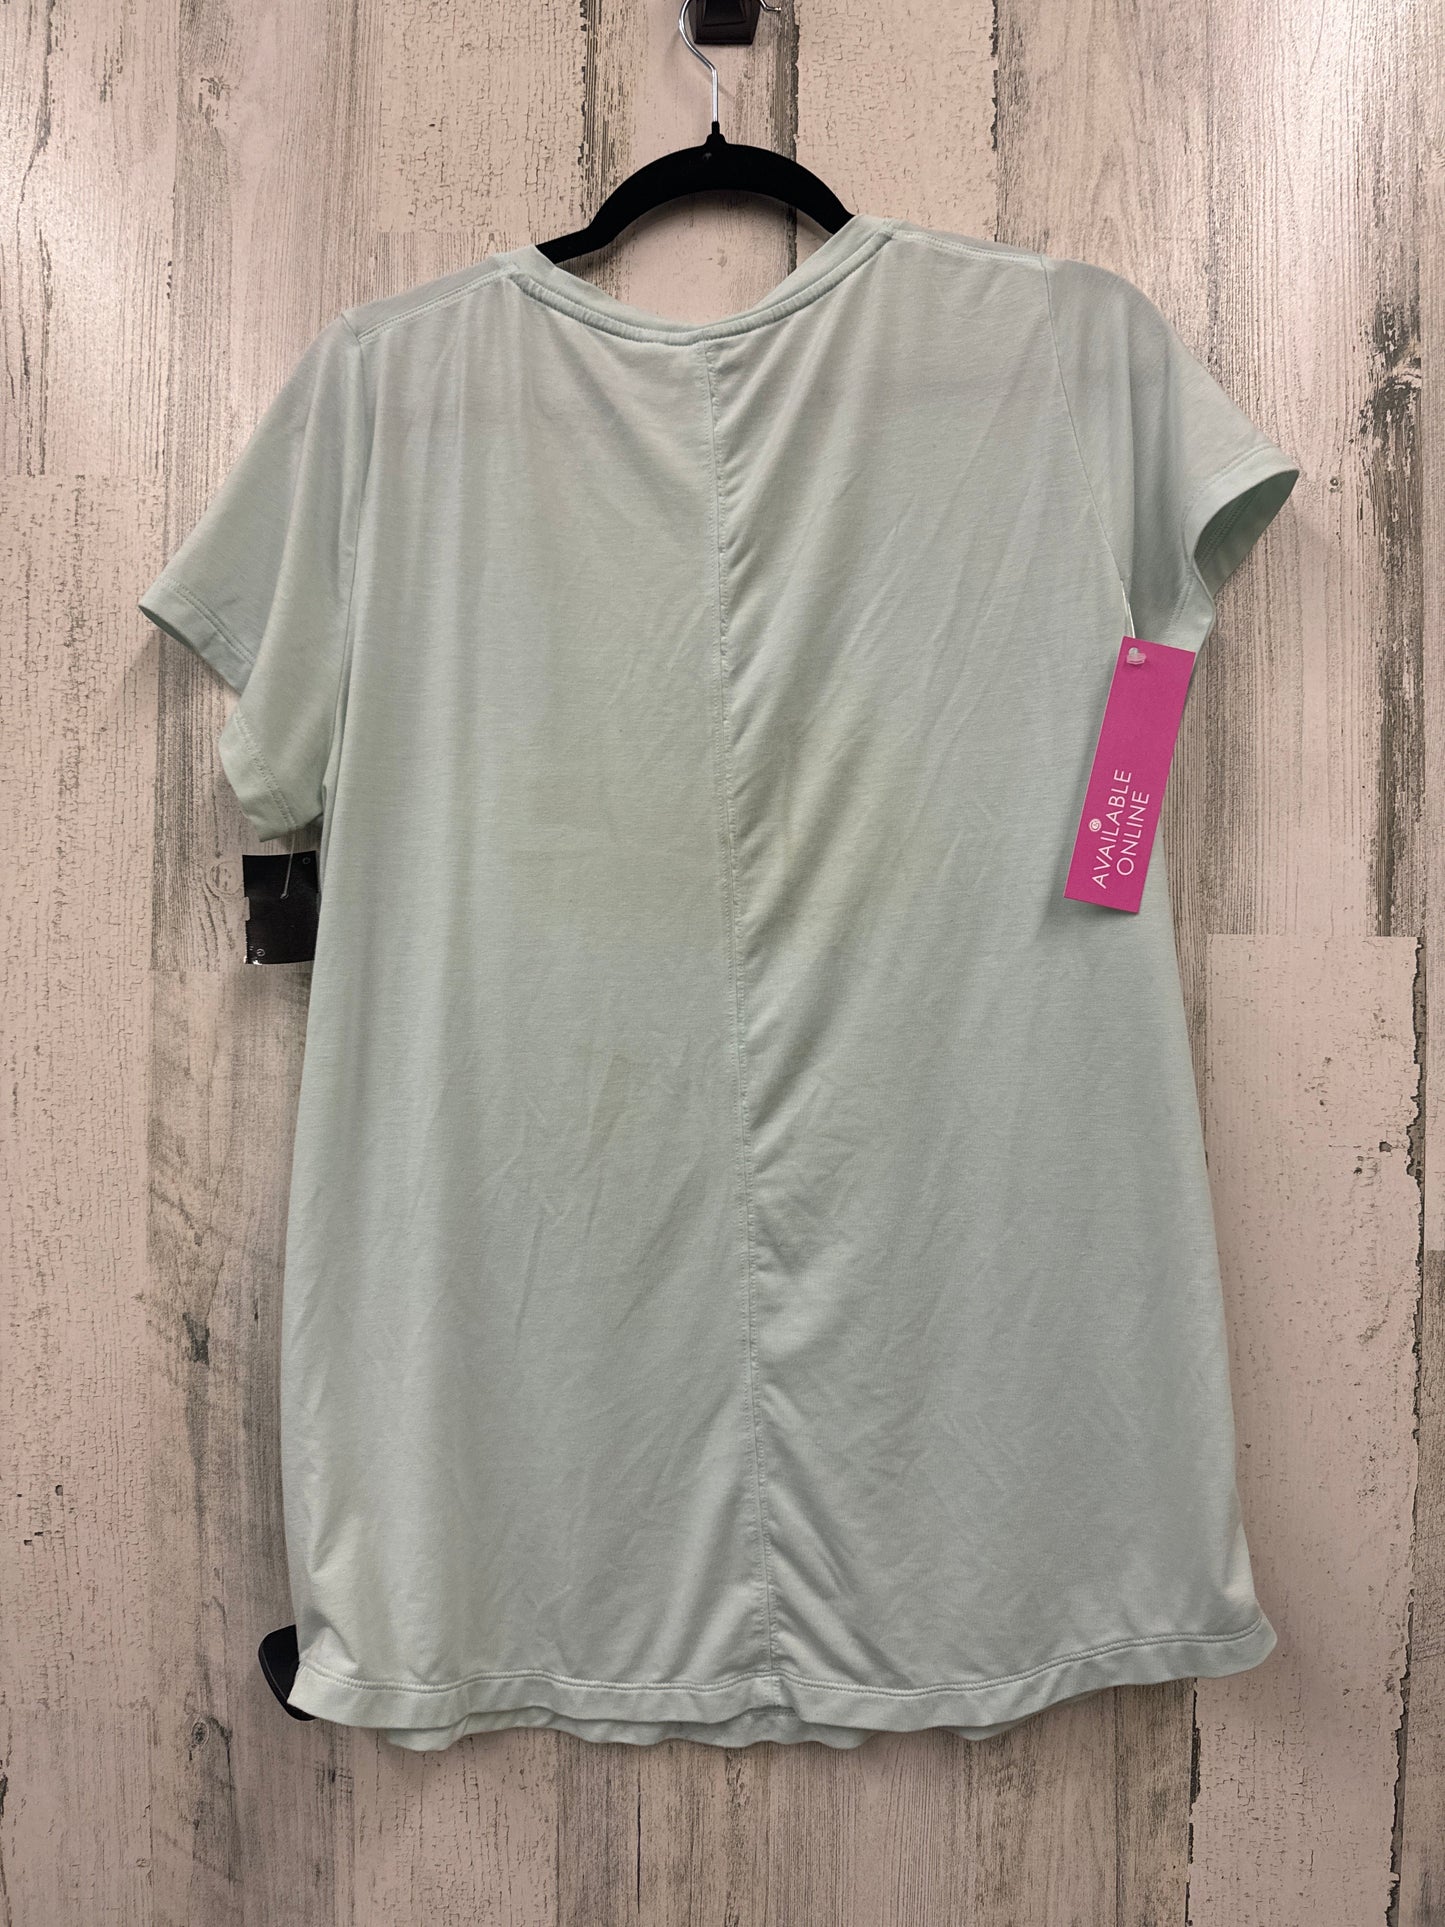 Athletic Top Short Sleeve By Athleta  Size: M